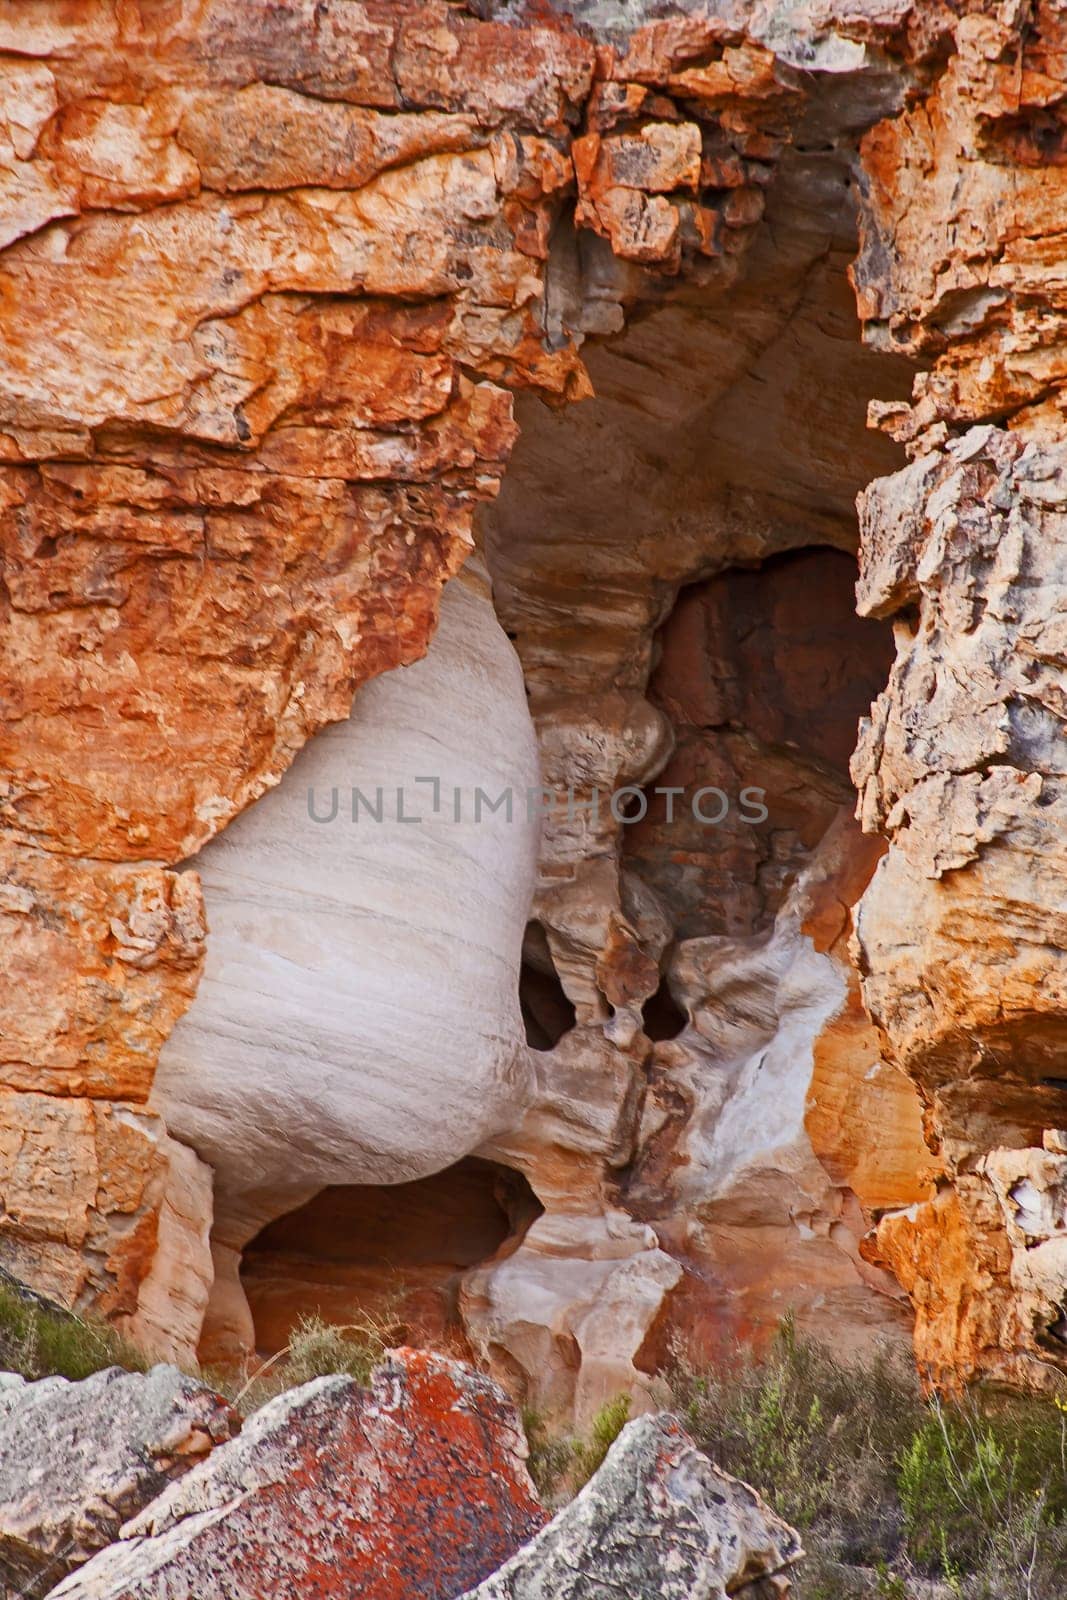 Cederberg Rock Formations 12952 by kobus_peche